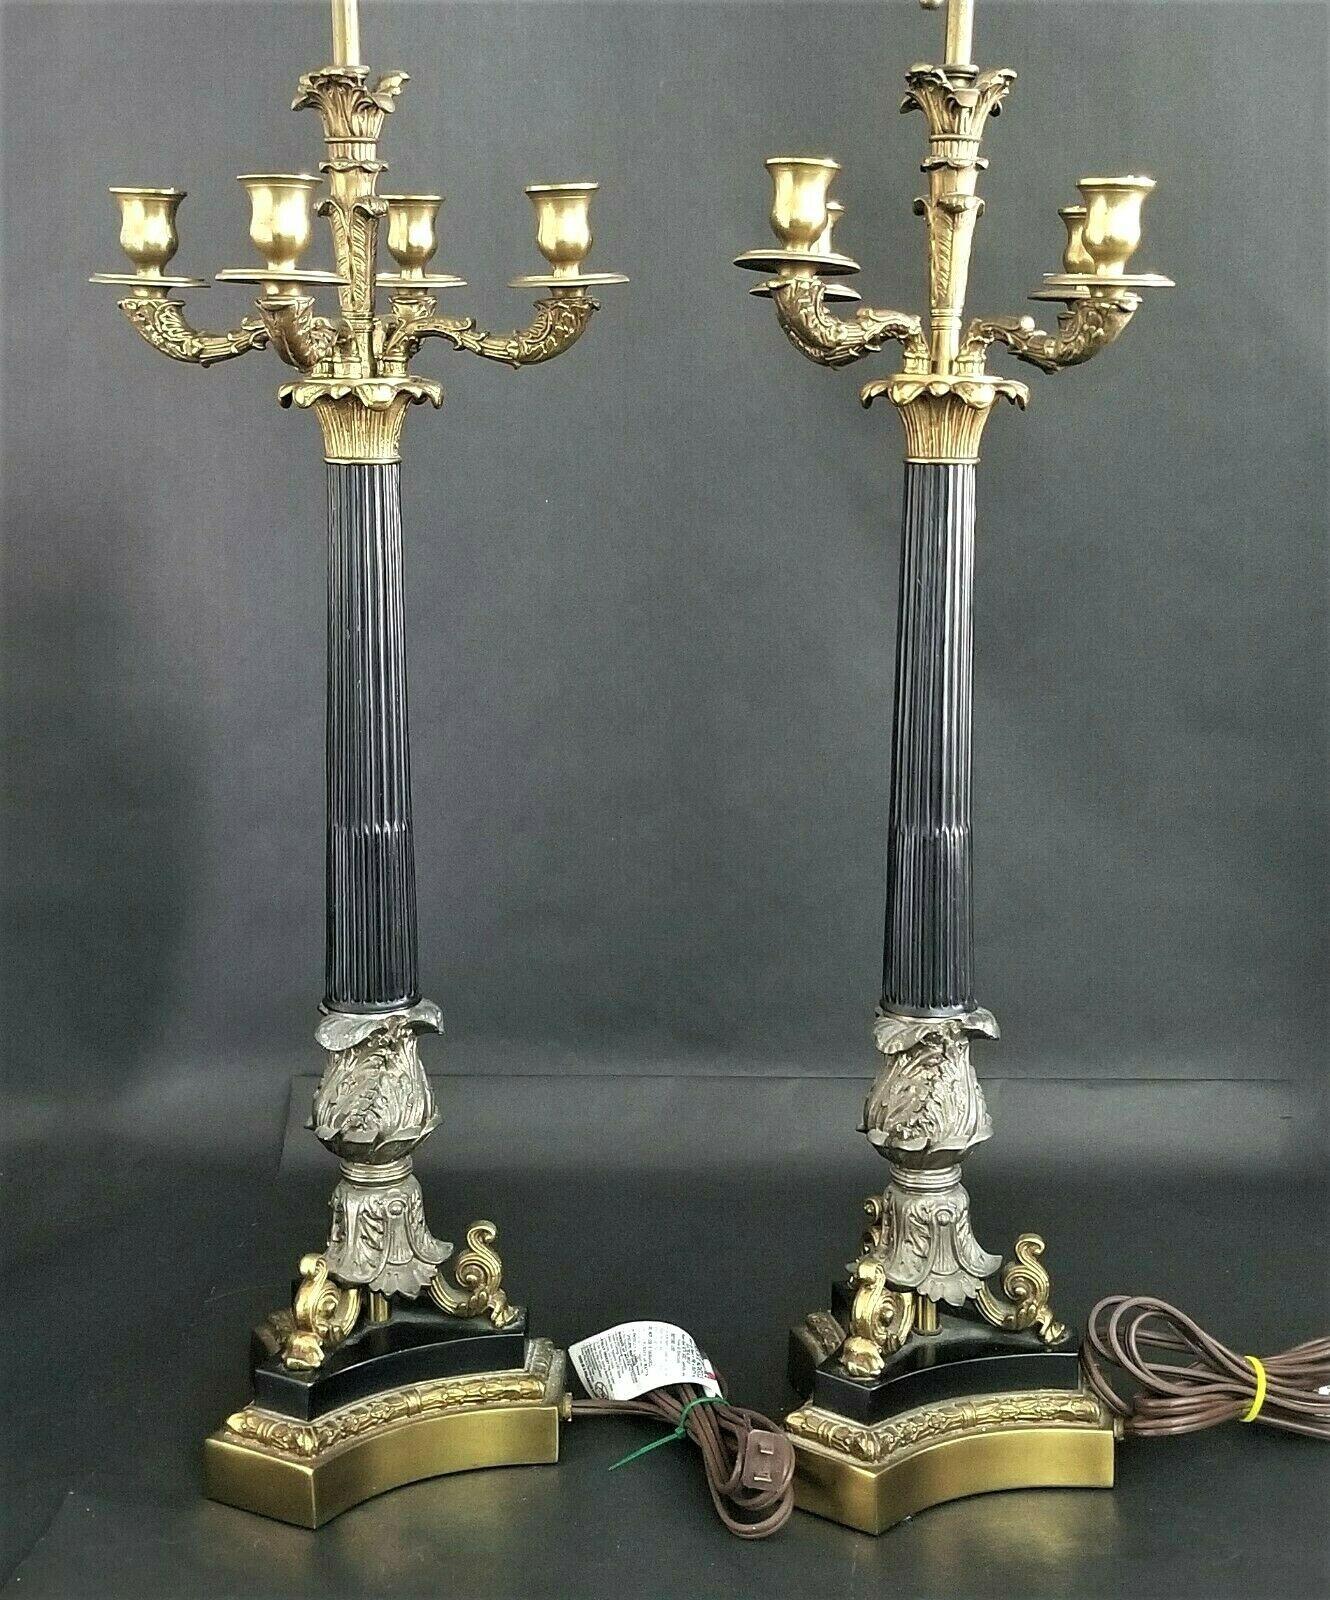 Offering one of our recent Palm Beach Estate fine lighting acquisitions of a
Pair of vintage Warren Kessler candelabra table lamps
Each lamp features 2 pull chains, 3-way sockets, and 4 Candleholders.

Approximate measurements in inches
40 1/2